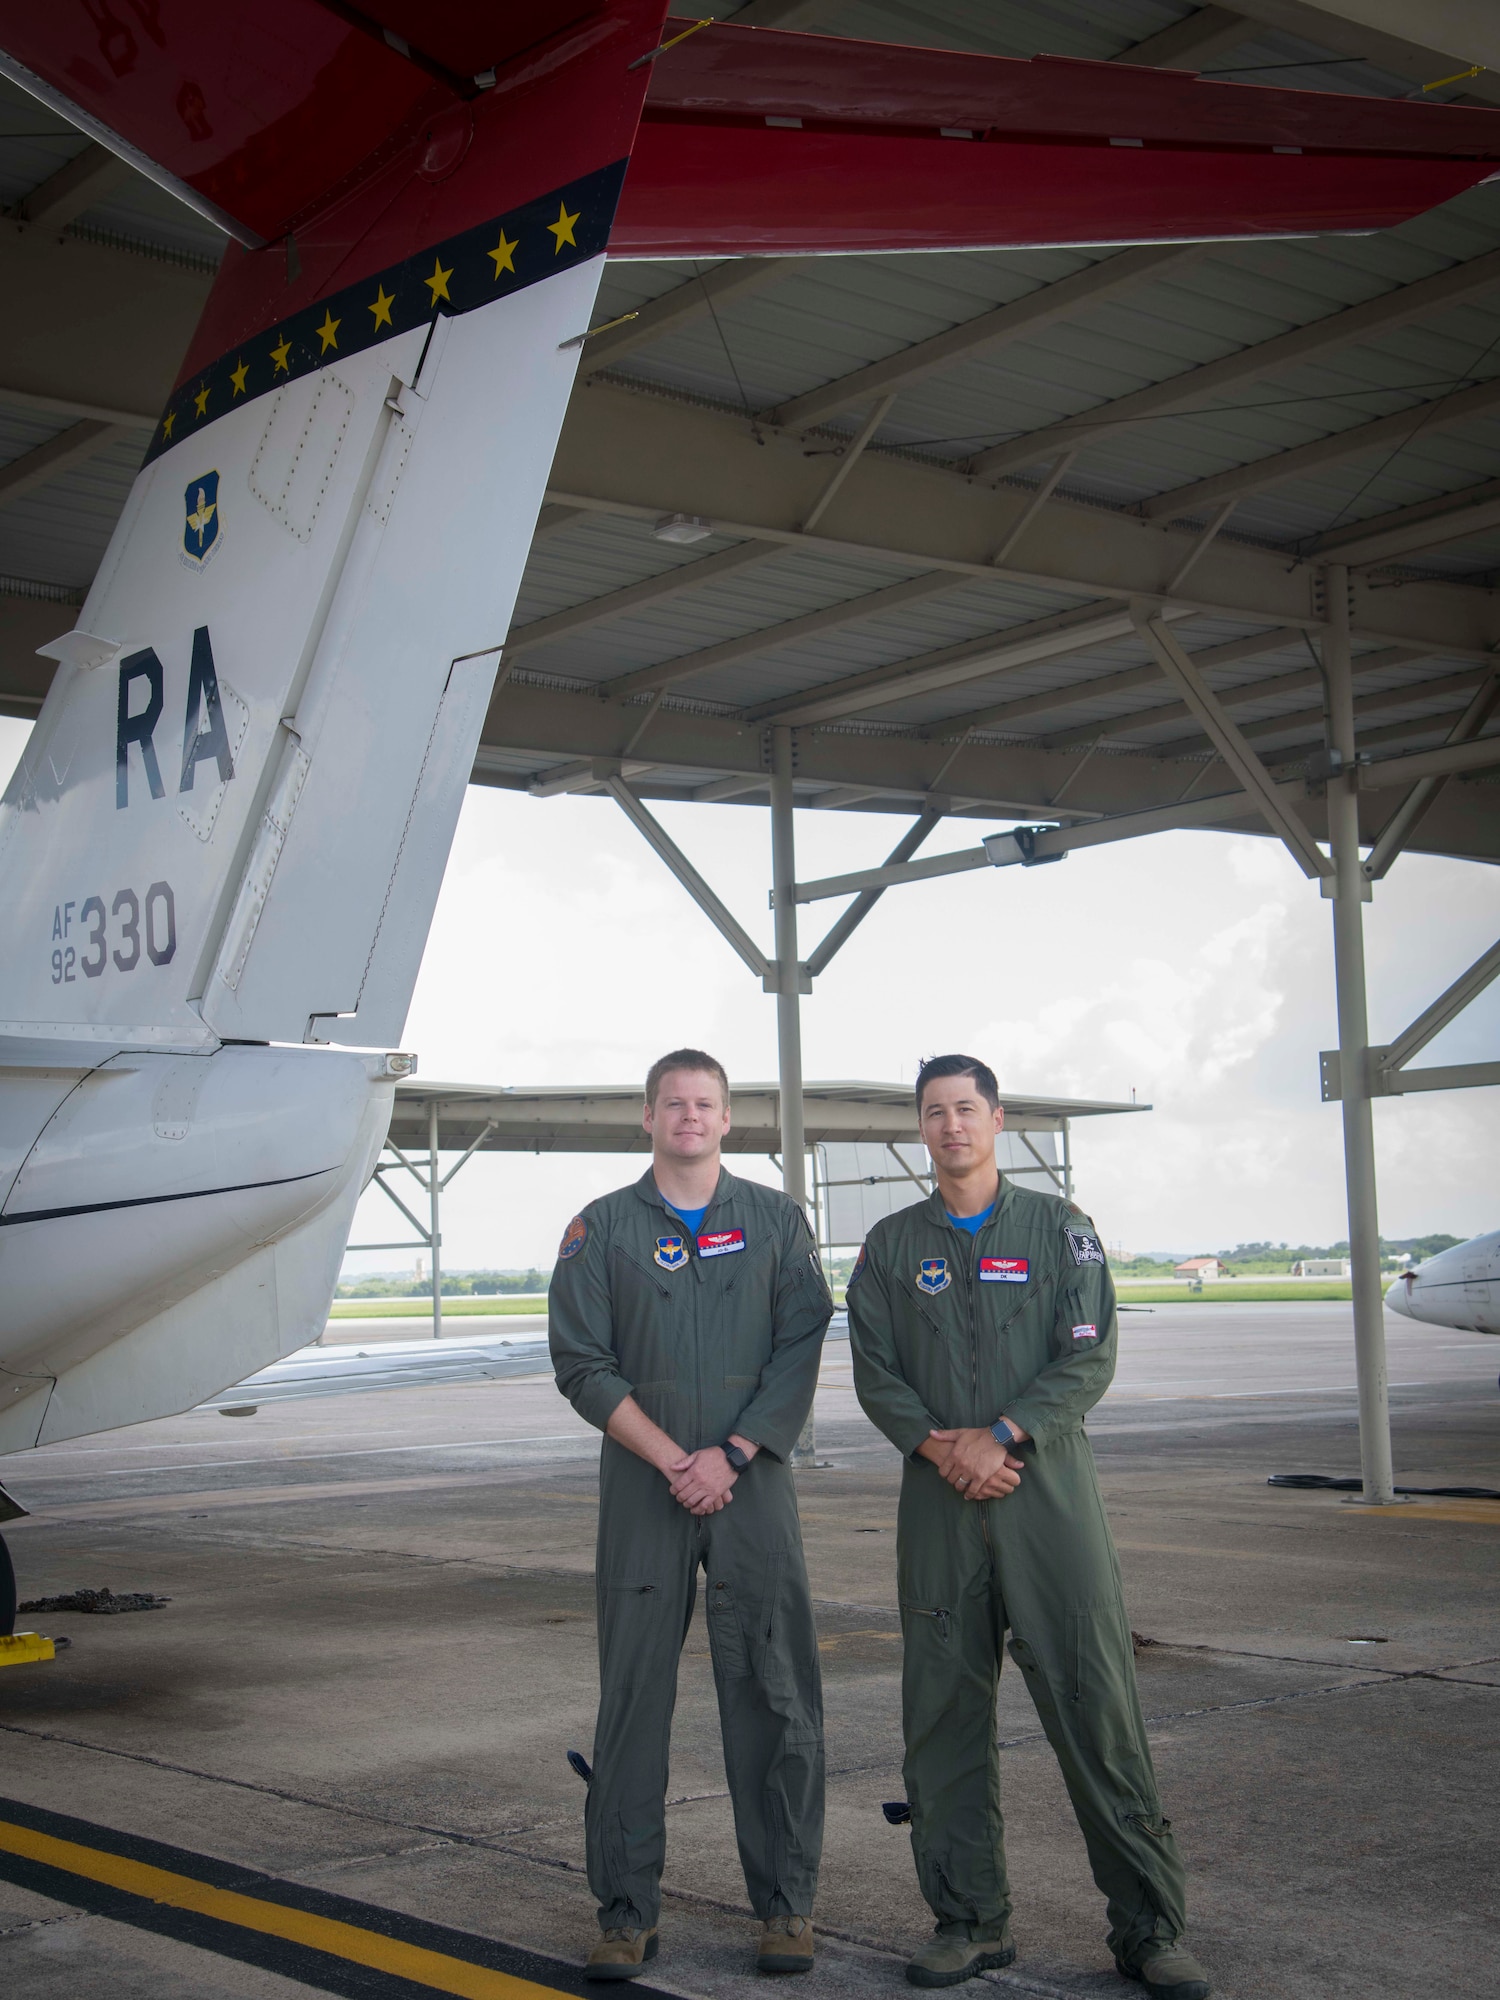 Maj. David Kim, 99th Flying Training Squadron Chief of Standardization and Evaluation and Maj. Joel Kliewer, 99th FTS pilot, pose in front of a T-1A Jayhawk. The T-1s sport a red stripe on the tail as a homage to their Tuskegee Airmen heritage. This resembles the red tails on the aircraft the original Tuskegee Airmen piloted as a way for their allies to spot them. (U.S. Air Force photo by: Airman 1st Class Shelby Pruitt)